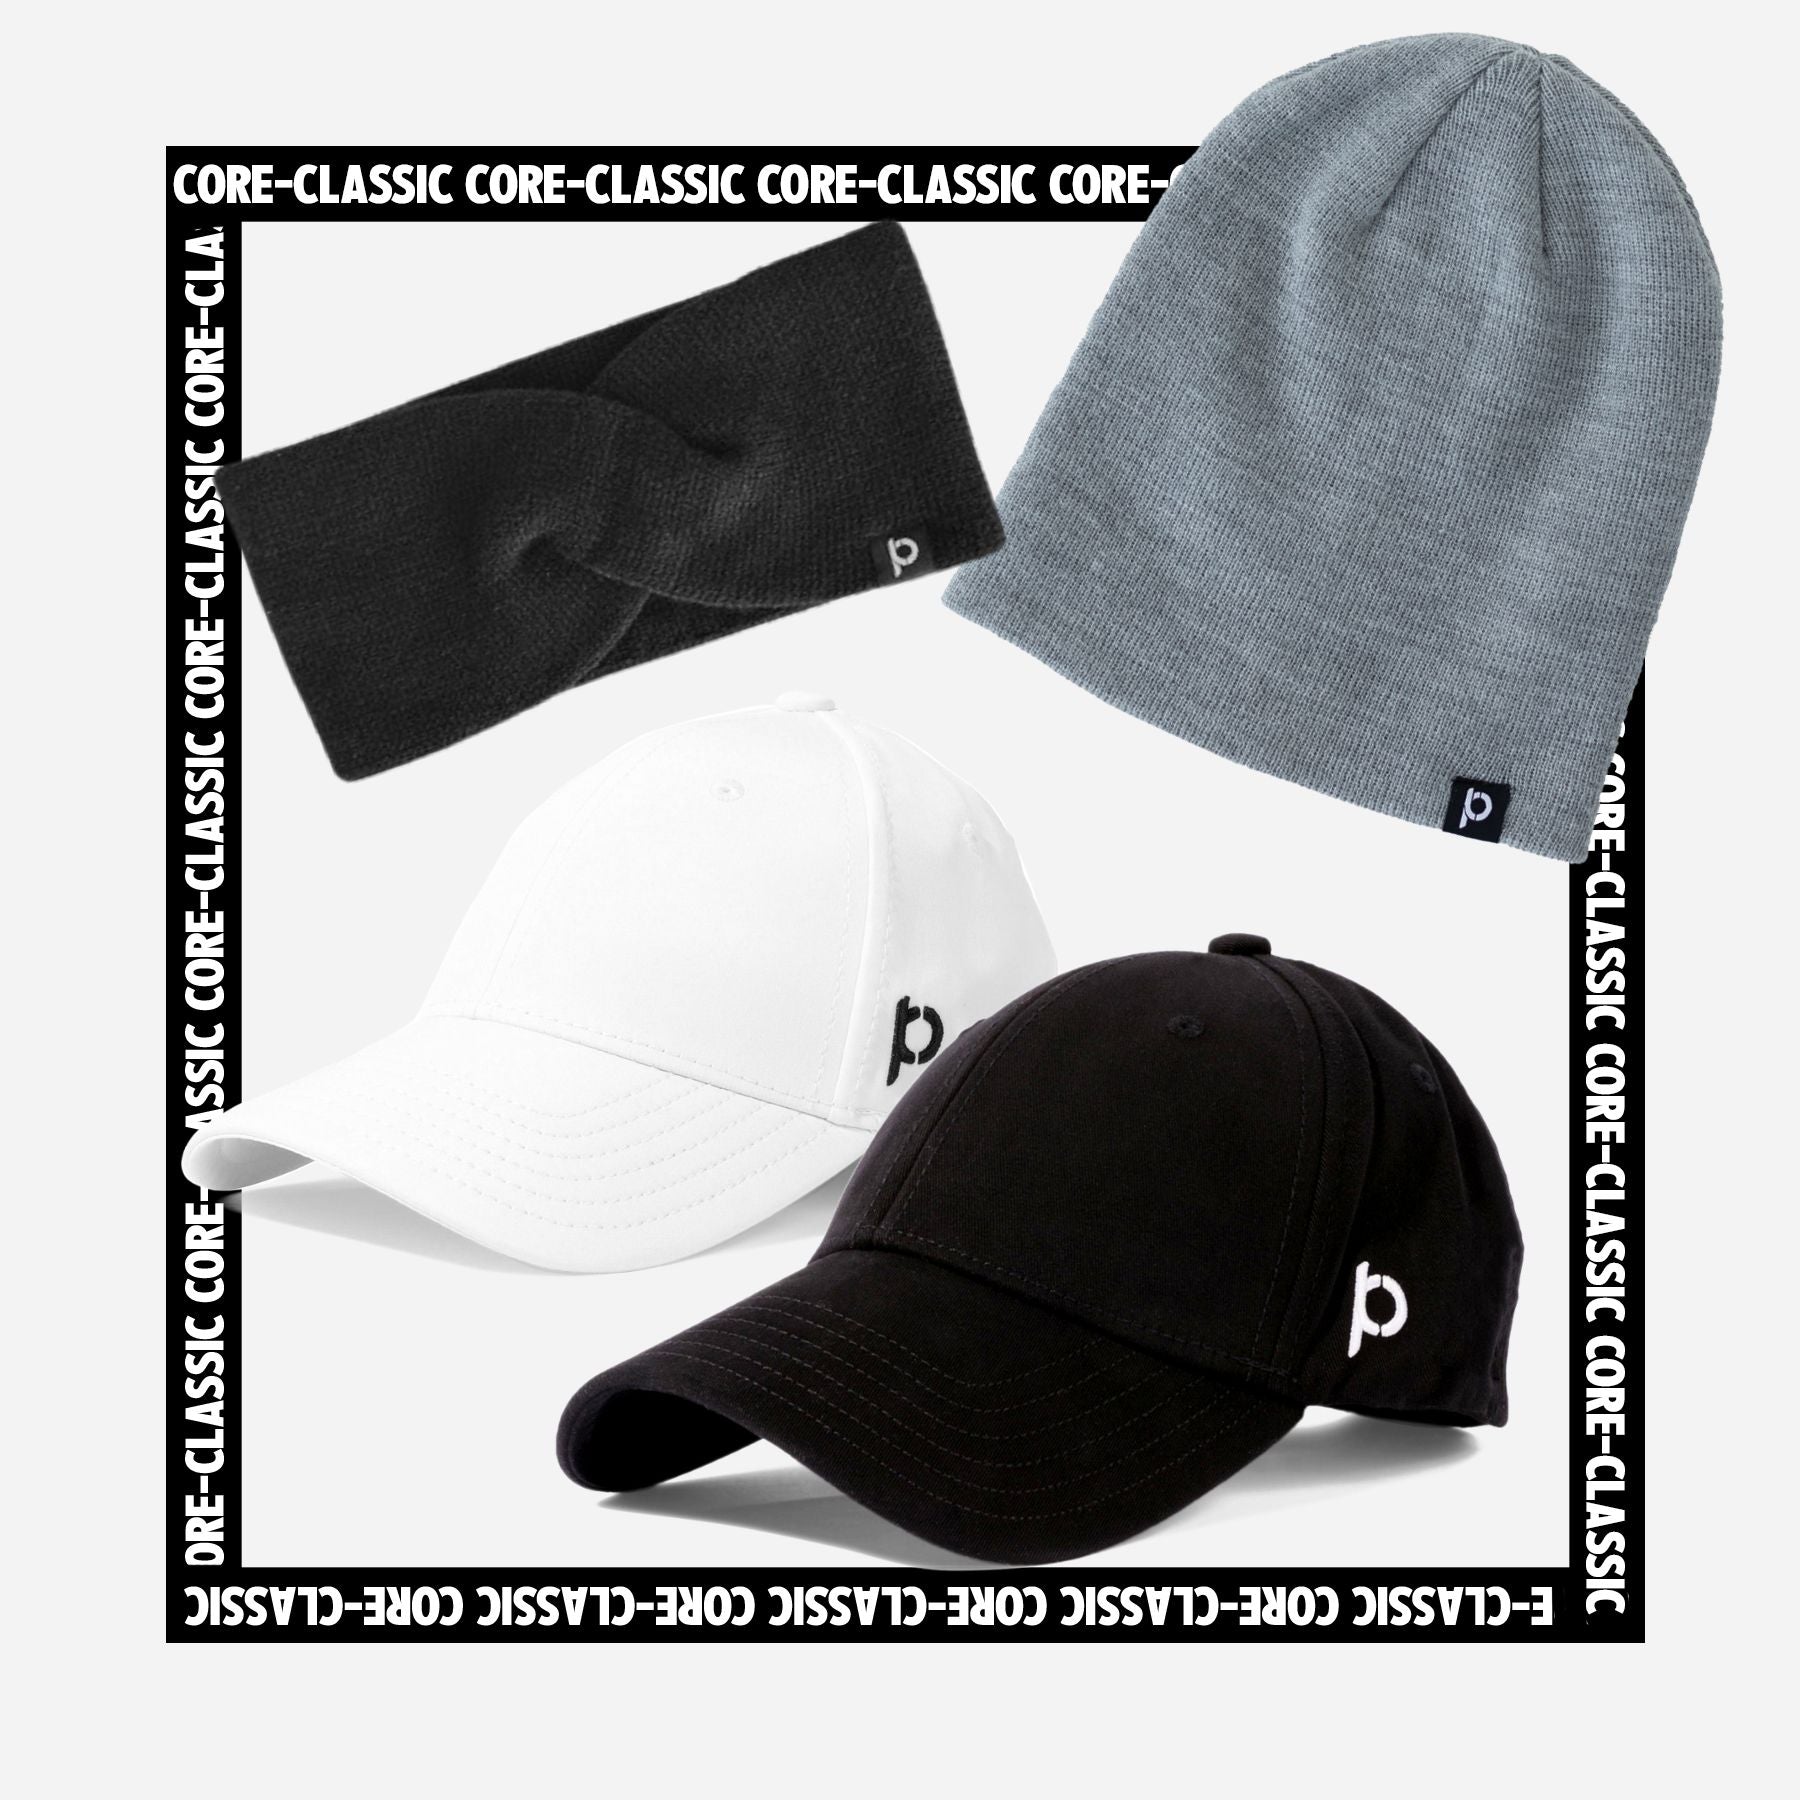 Ponyback Core classic bundle with a beanie, headband, and white and black baseball hats